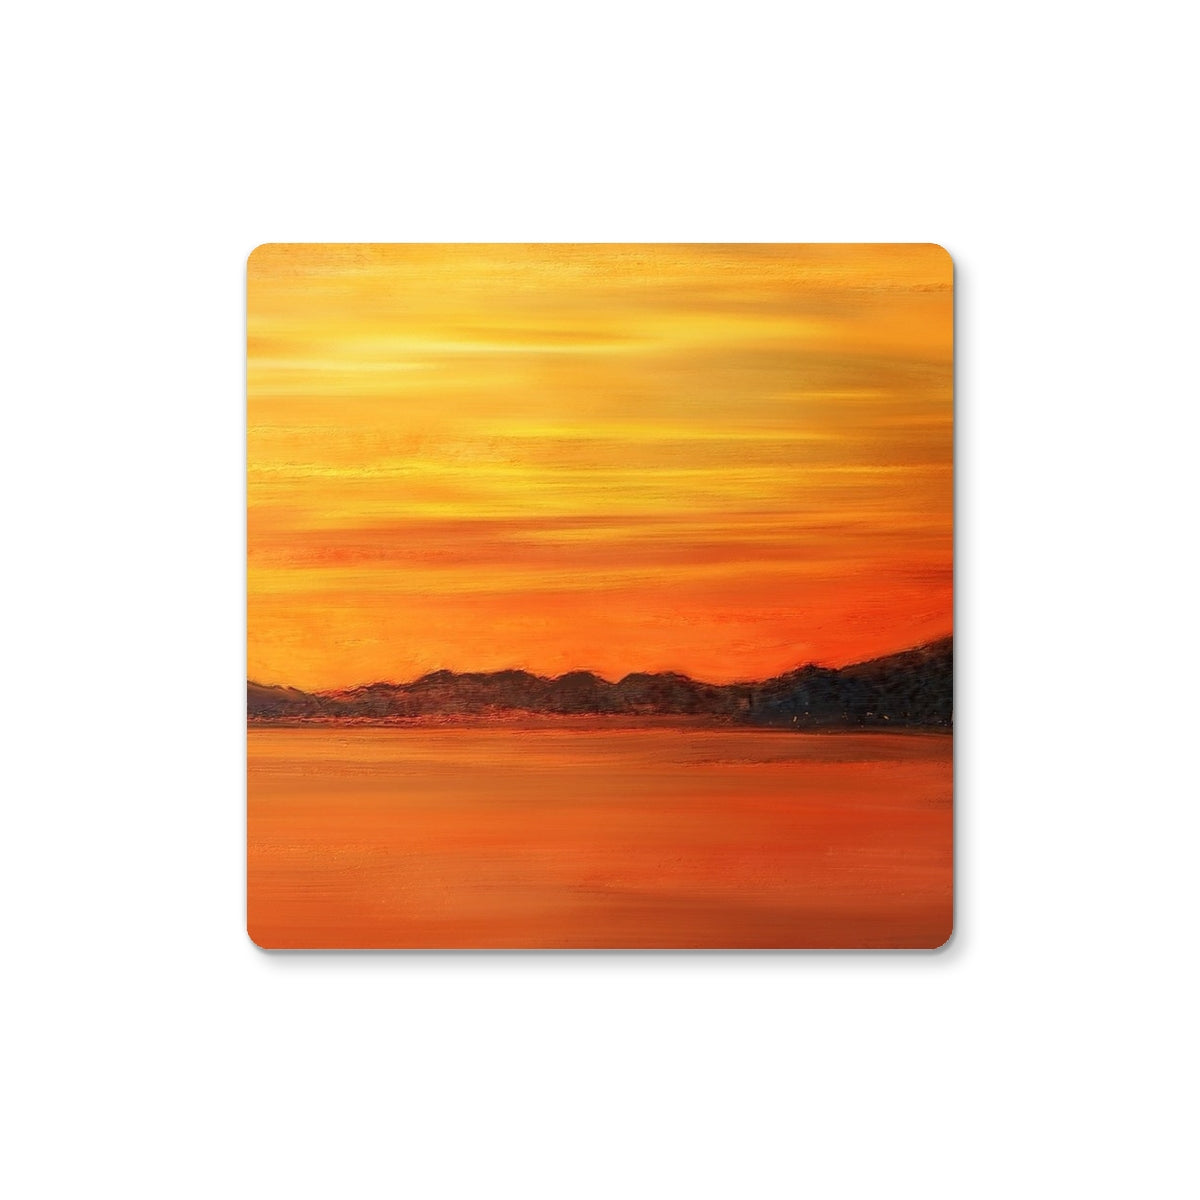 Loch Fyne Sunset Art Gifts Coaster-Homeware-Scottish Lochs & Mountains Art Gallery-2 Coasters-Paintings, Prints, Homeware, Art Gifts From Scotland By Scottish Artist Kevin Hunter